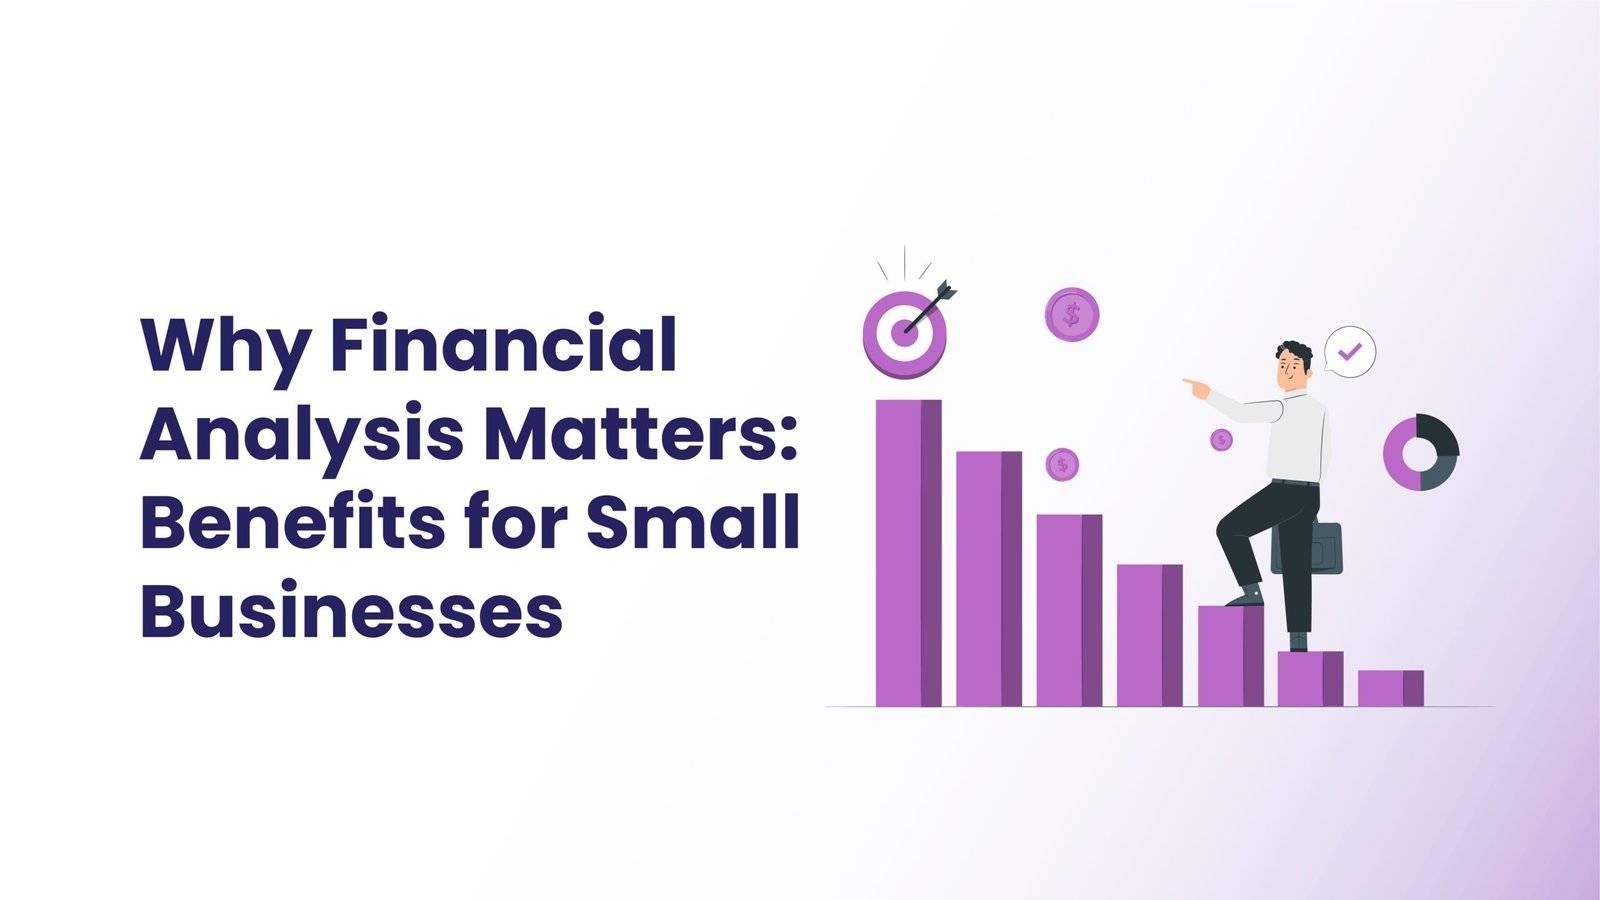 Why Financial Analysis Matters: Benefits for Small Businesses